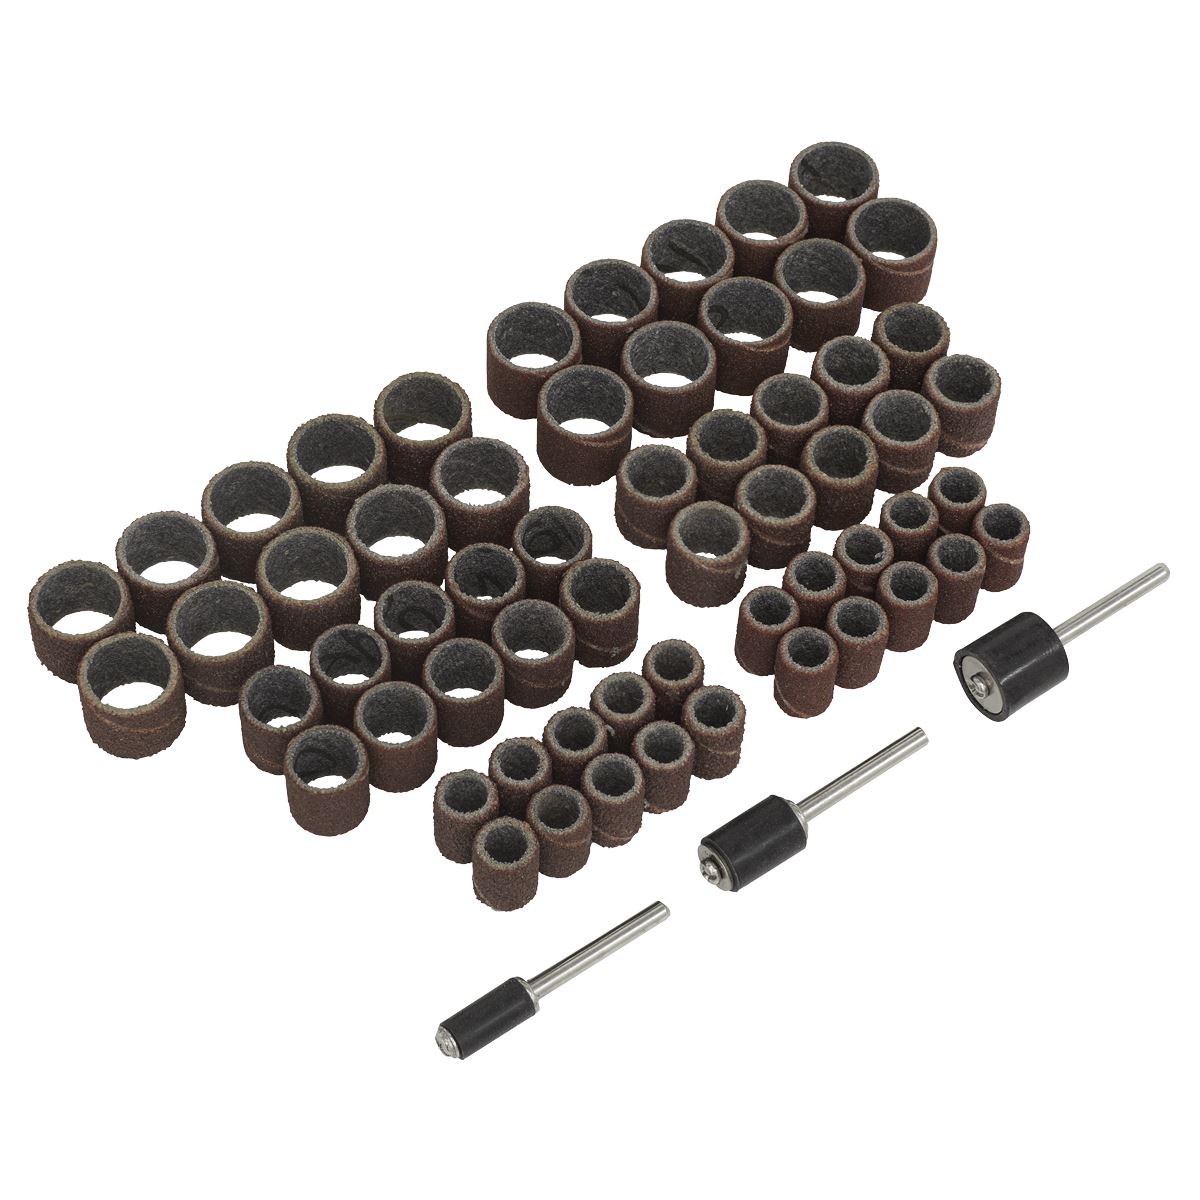 Sealey Rotary Tool Sanding Drum Bands Set 63 Piece